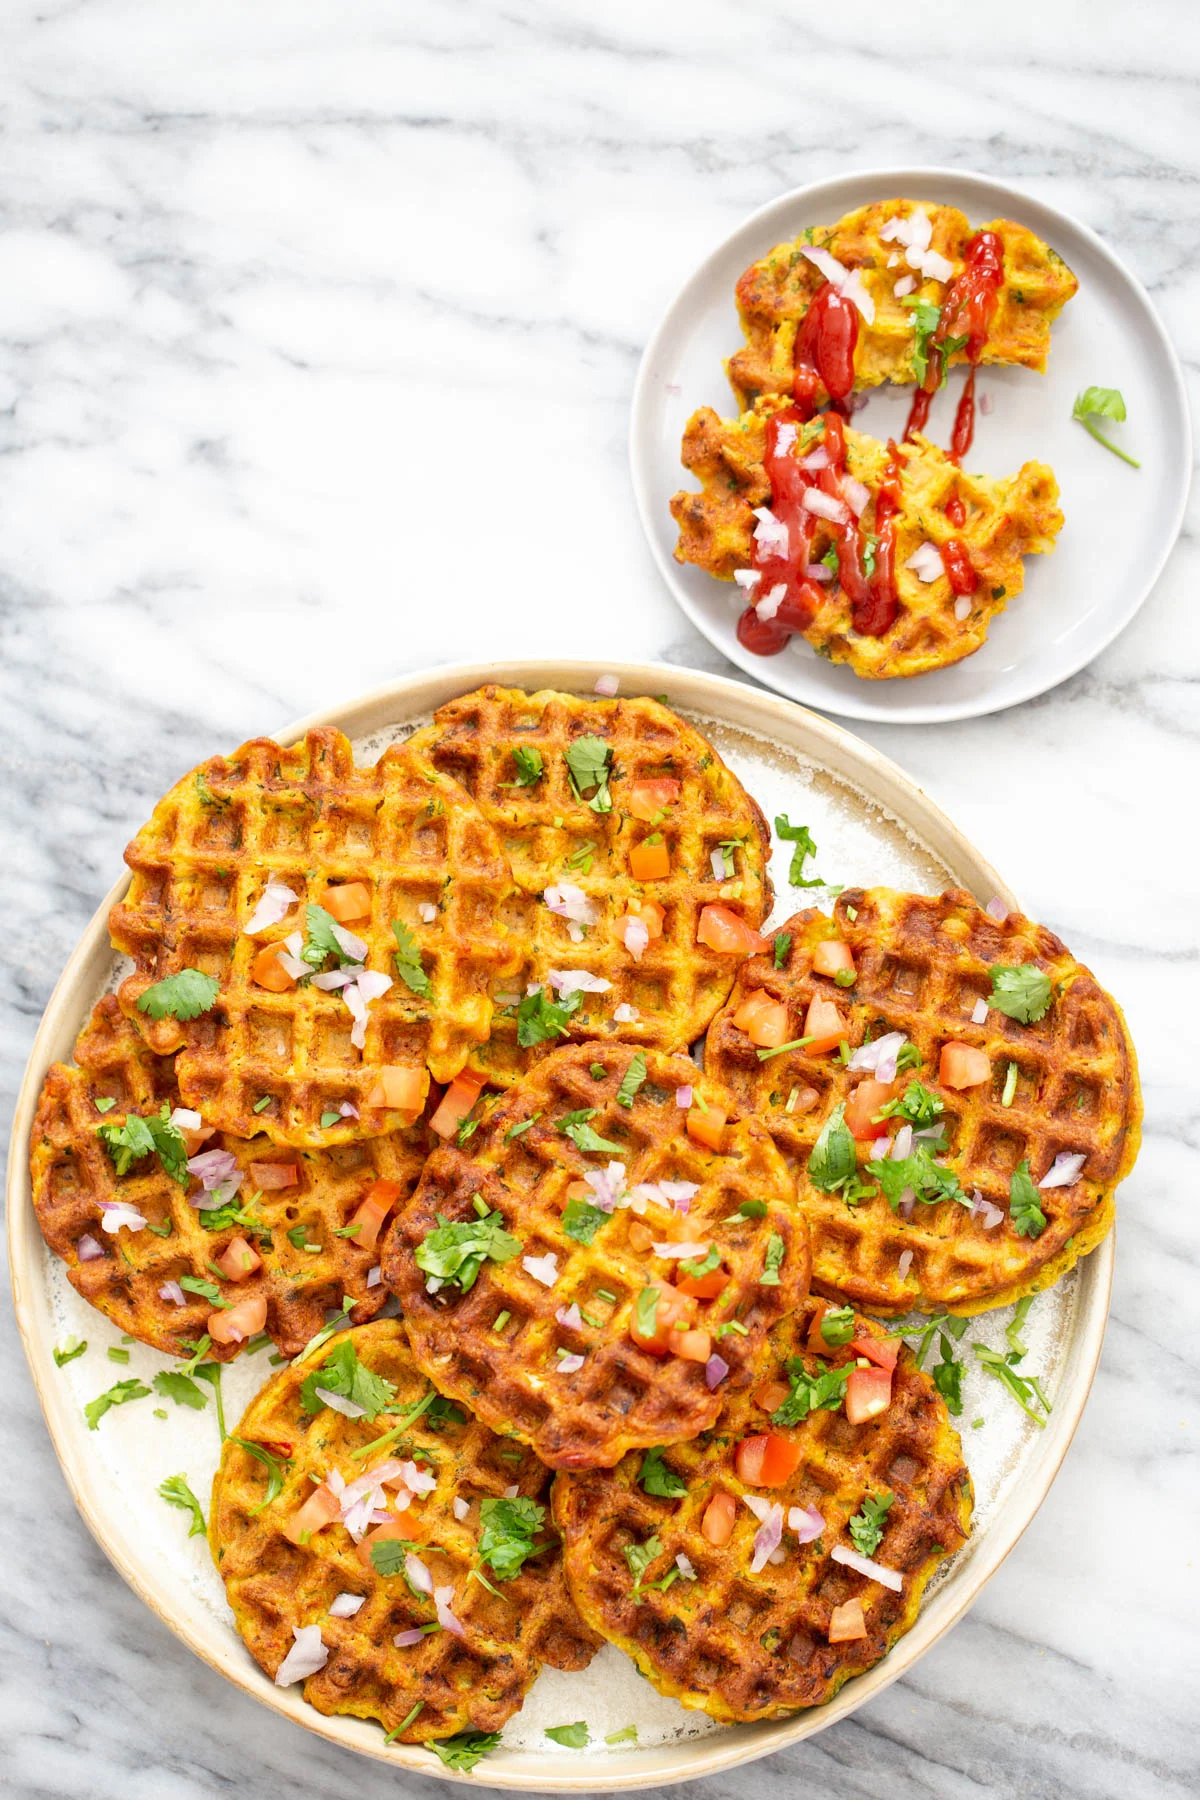 Savory waffles are topped with herbs, onions and tomotoes